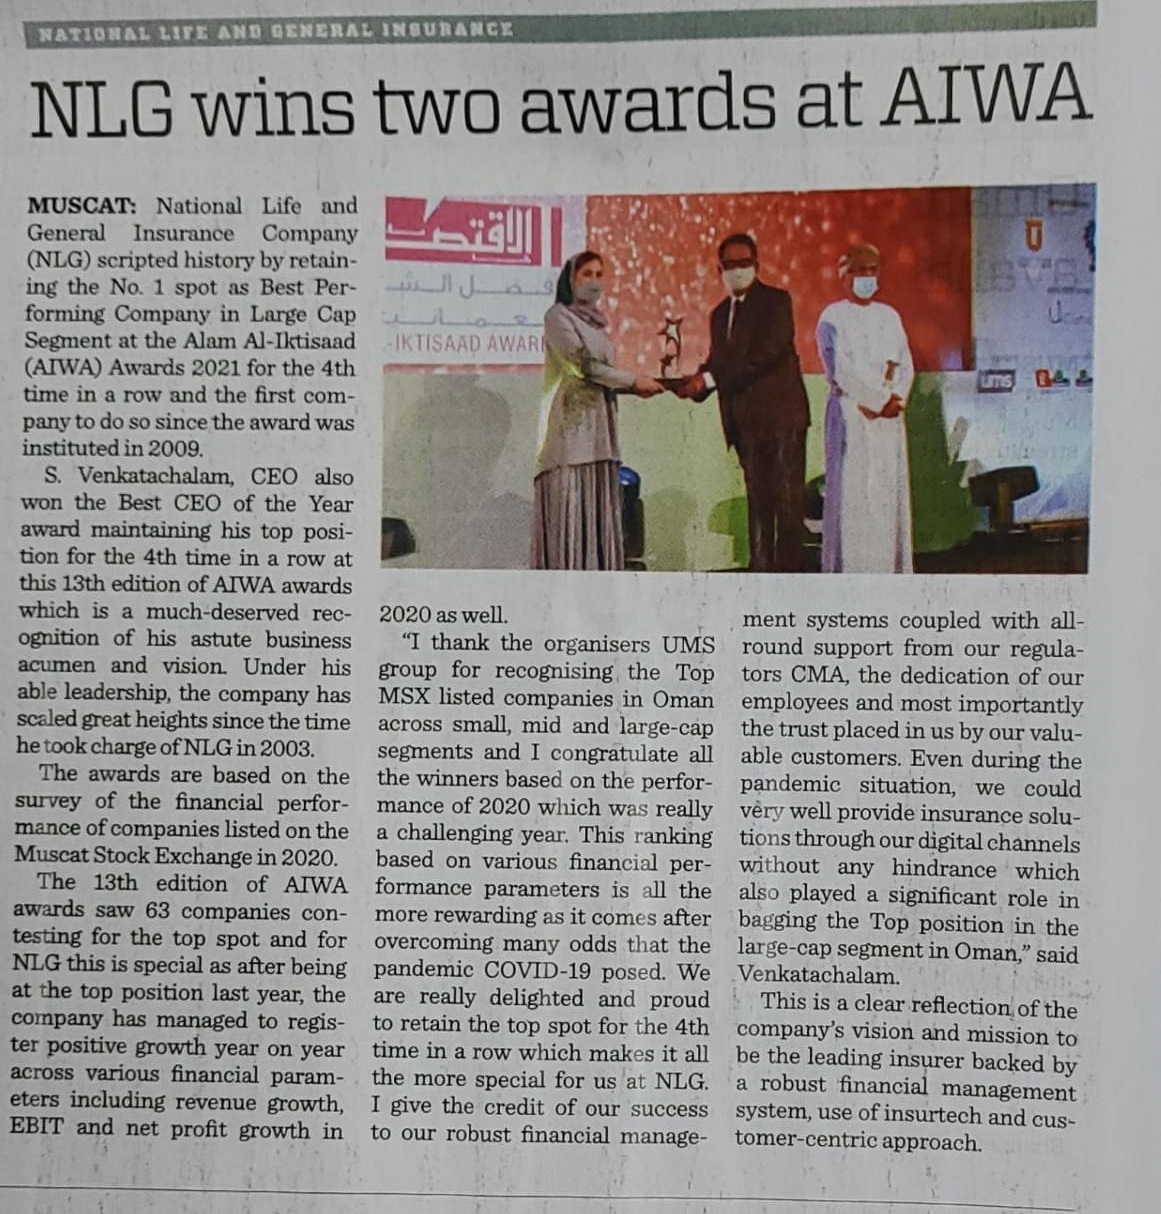 Win two awards 4 times in a row at AIWA 2021 as the #1 Company in Large cap segment and Best CEO of the Year Award